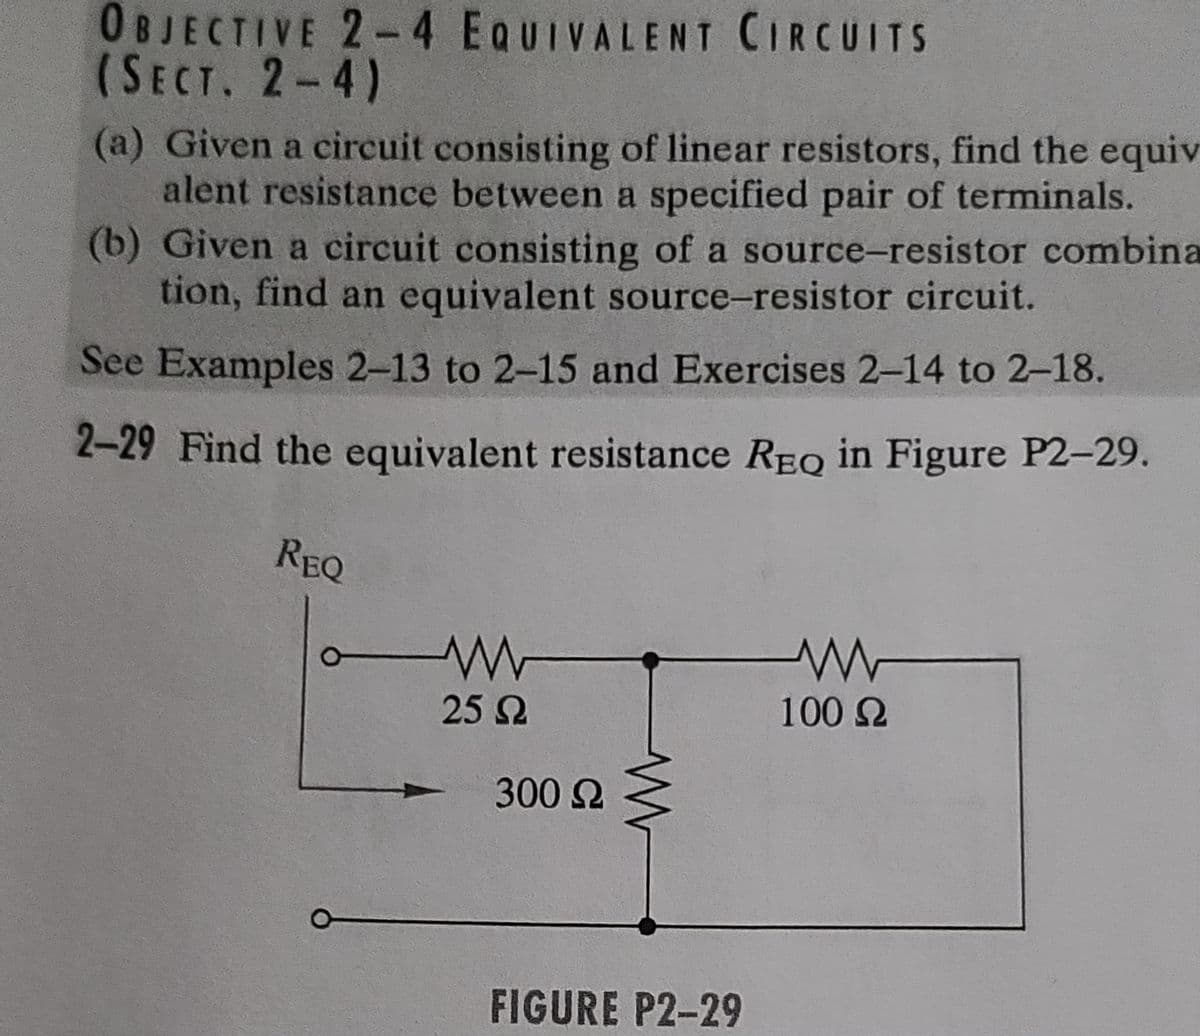 OBJECTIVE 2-4 EQUIVALENT CIRCUITS
(SECT. 2-4)
(a) Given a circuit consisting of linear resistors, find the equiv
alent resistance between a specified pair of terminals.
(b) Given a circuit consisting of a source-resistor combina
tion, find an equivalent source-resistor circuit.
See Examples 2-13 to 2-15 and Exercises 2-14 to 2-18.
2-29 Find the equivalent resistance REQ in Figure P2-29.
REQ
25 Ω
300 Ω
FIGURE P2-29
100 Ω